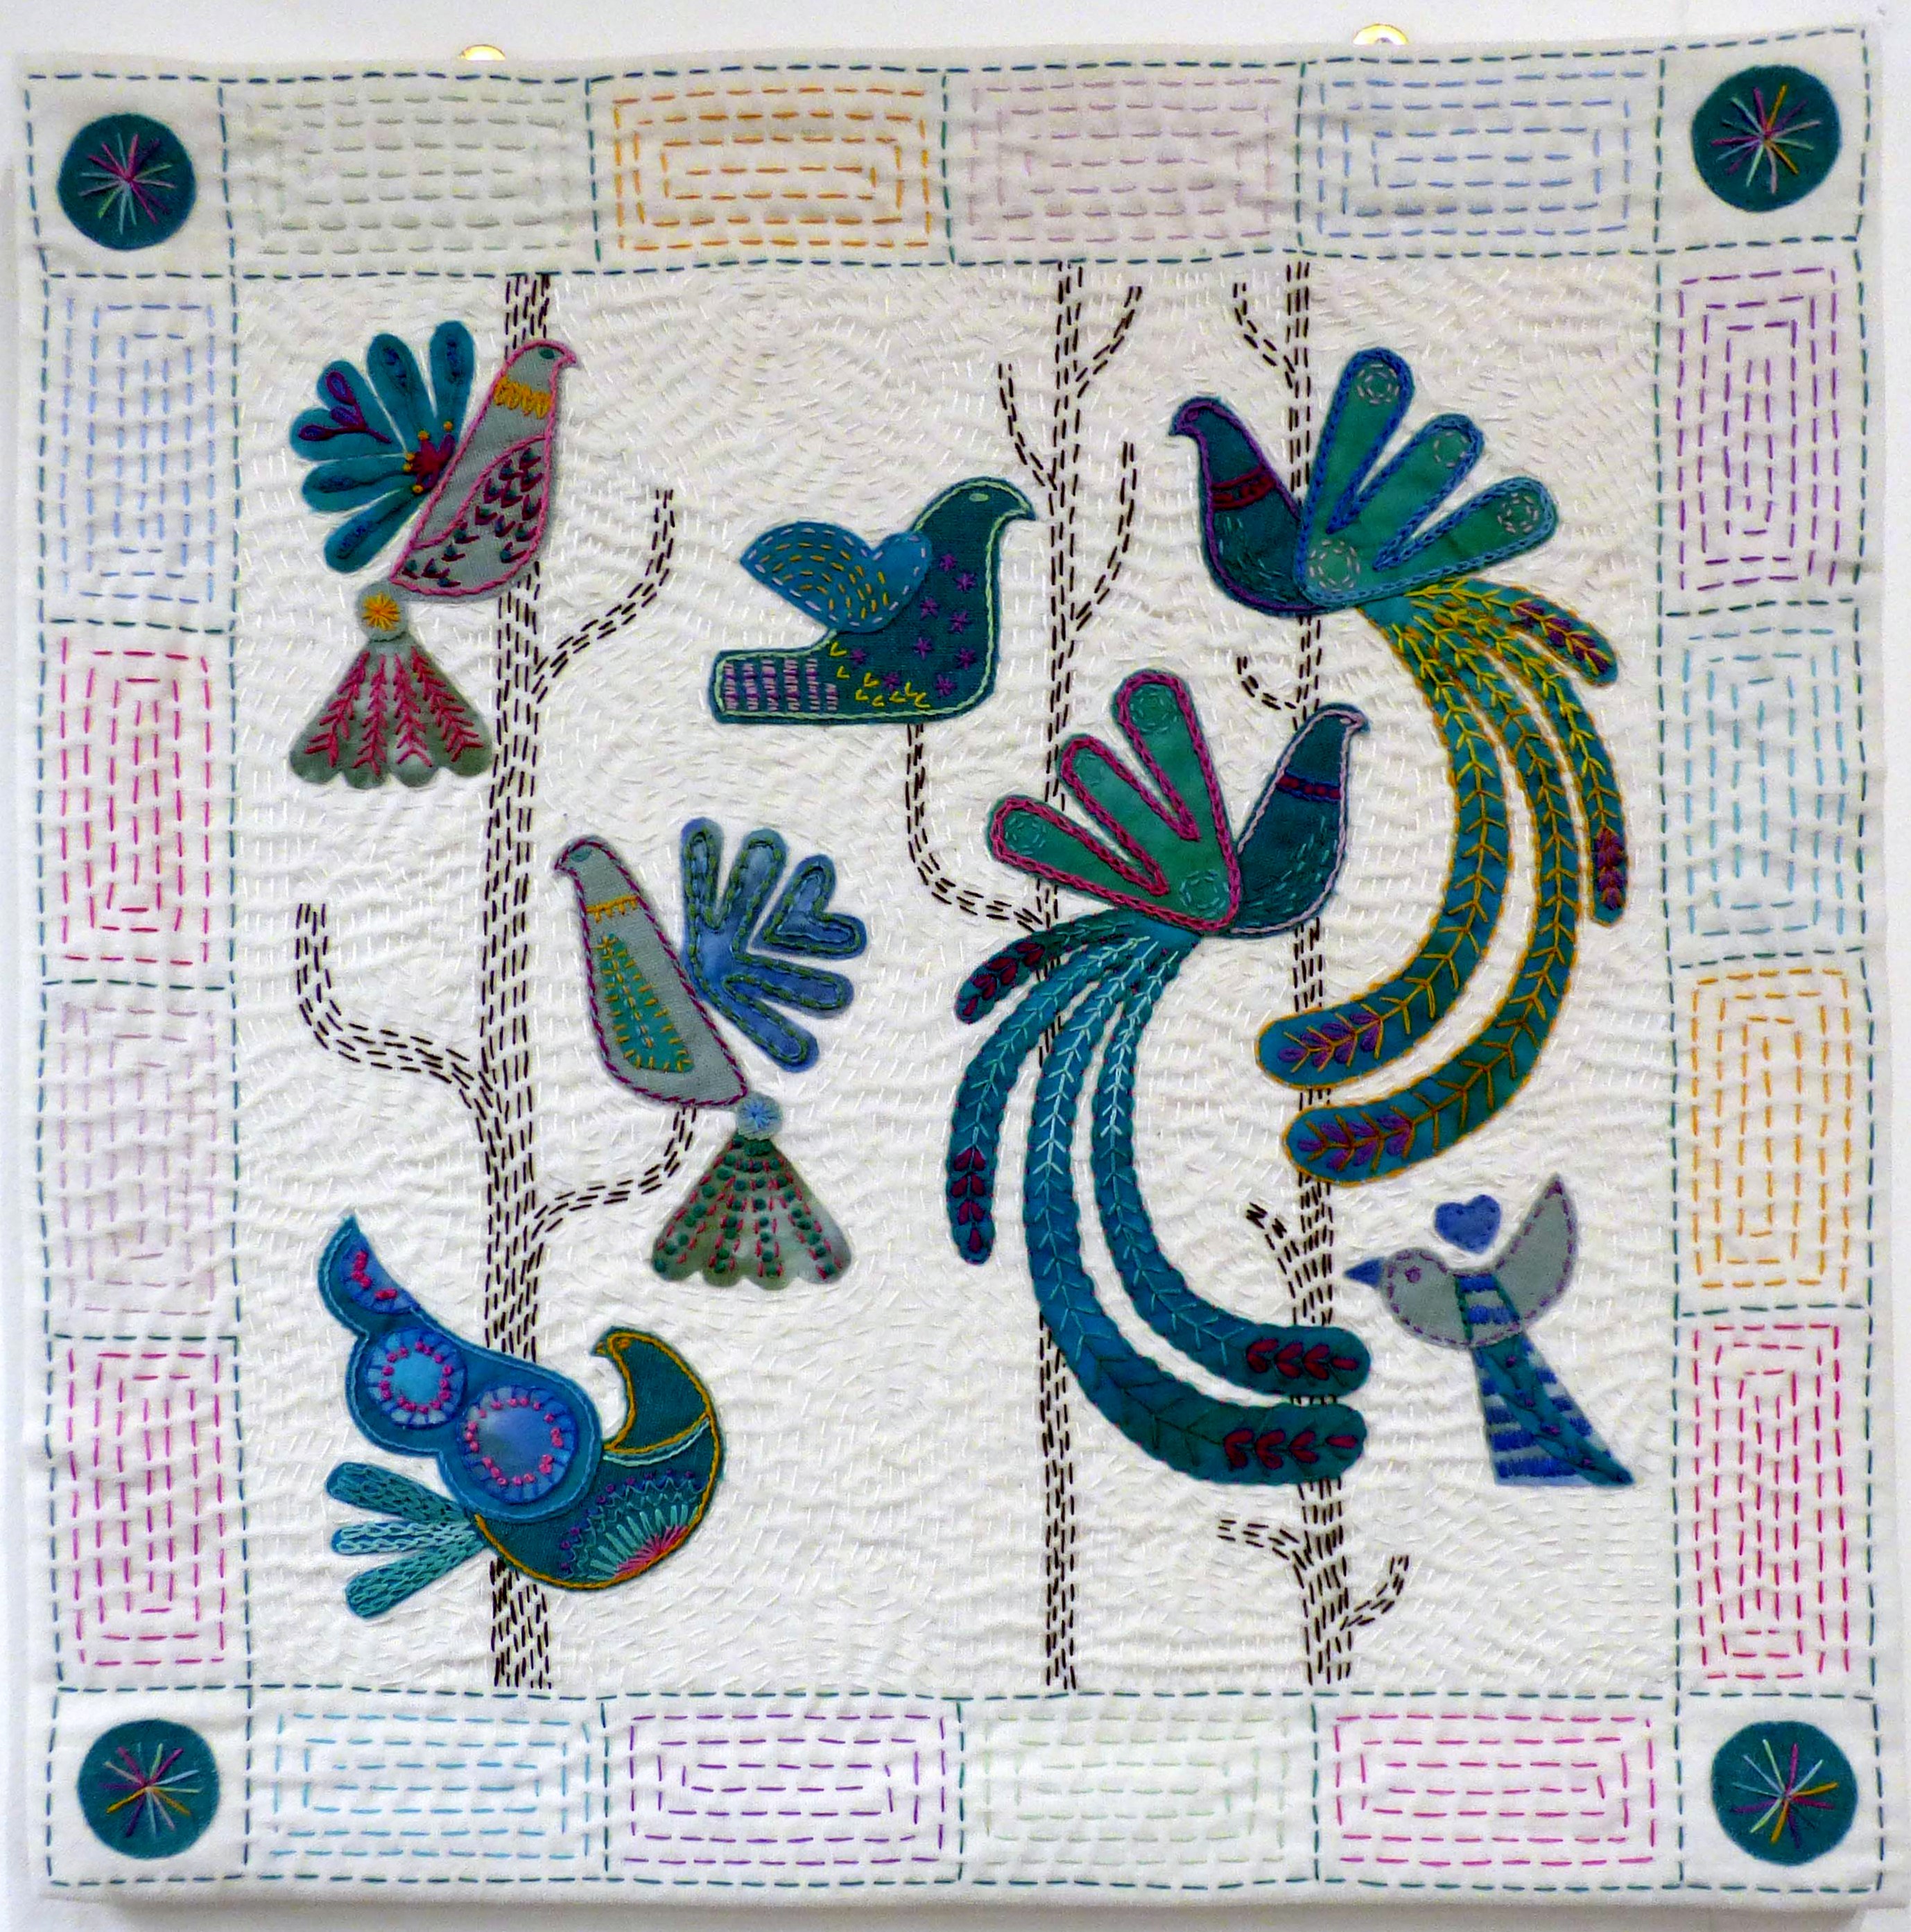 PEACOCKS AND PIGEONS by Jane Holmes, Natural Progression Group, July 2021